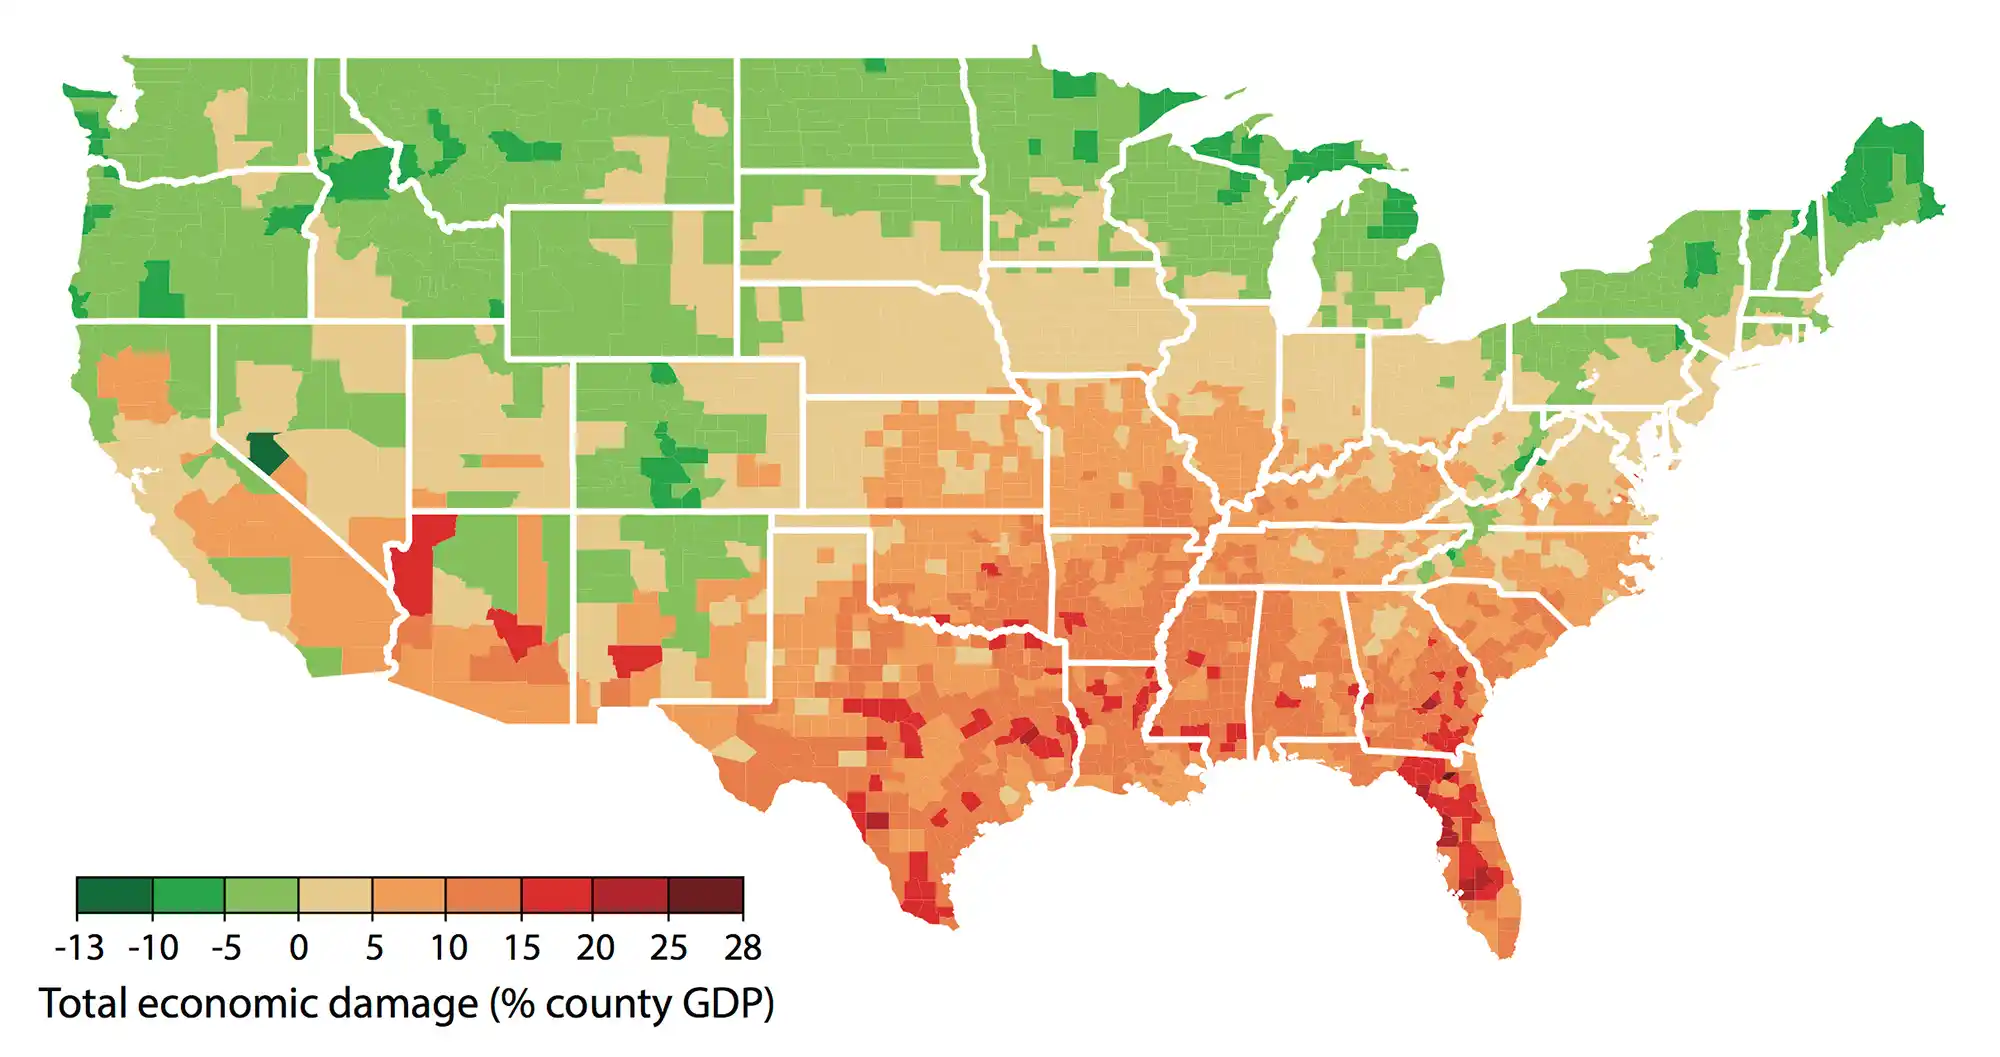 Mapping The Potential Economic Effects Of Climate Change in The US : Credit: NPR